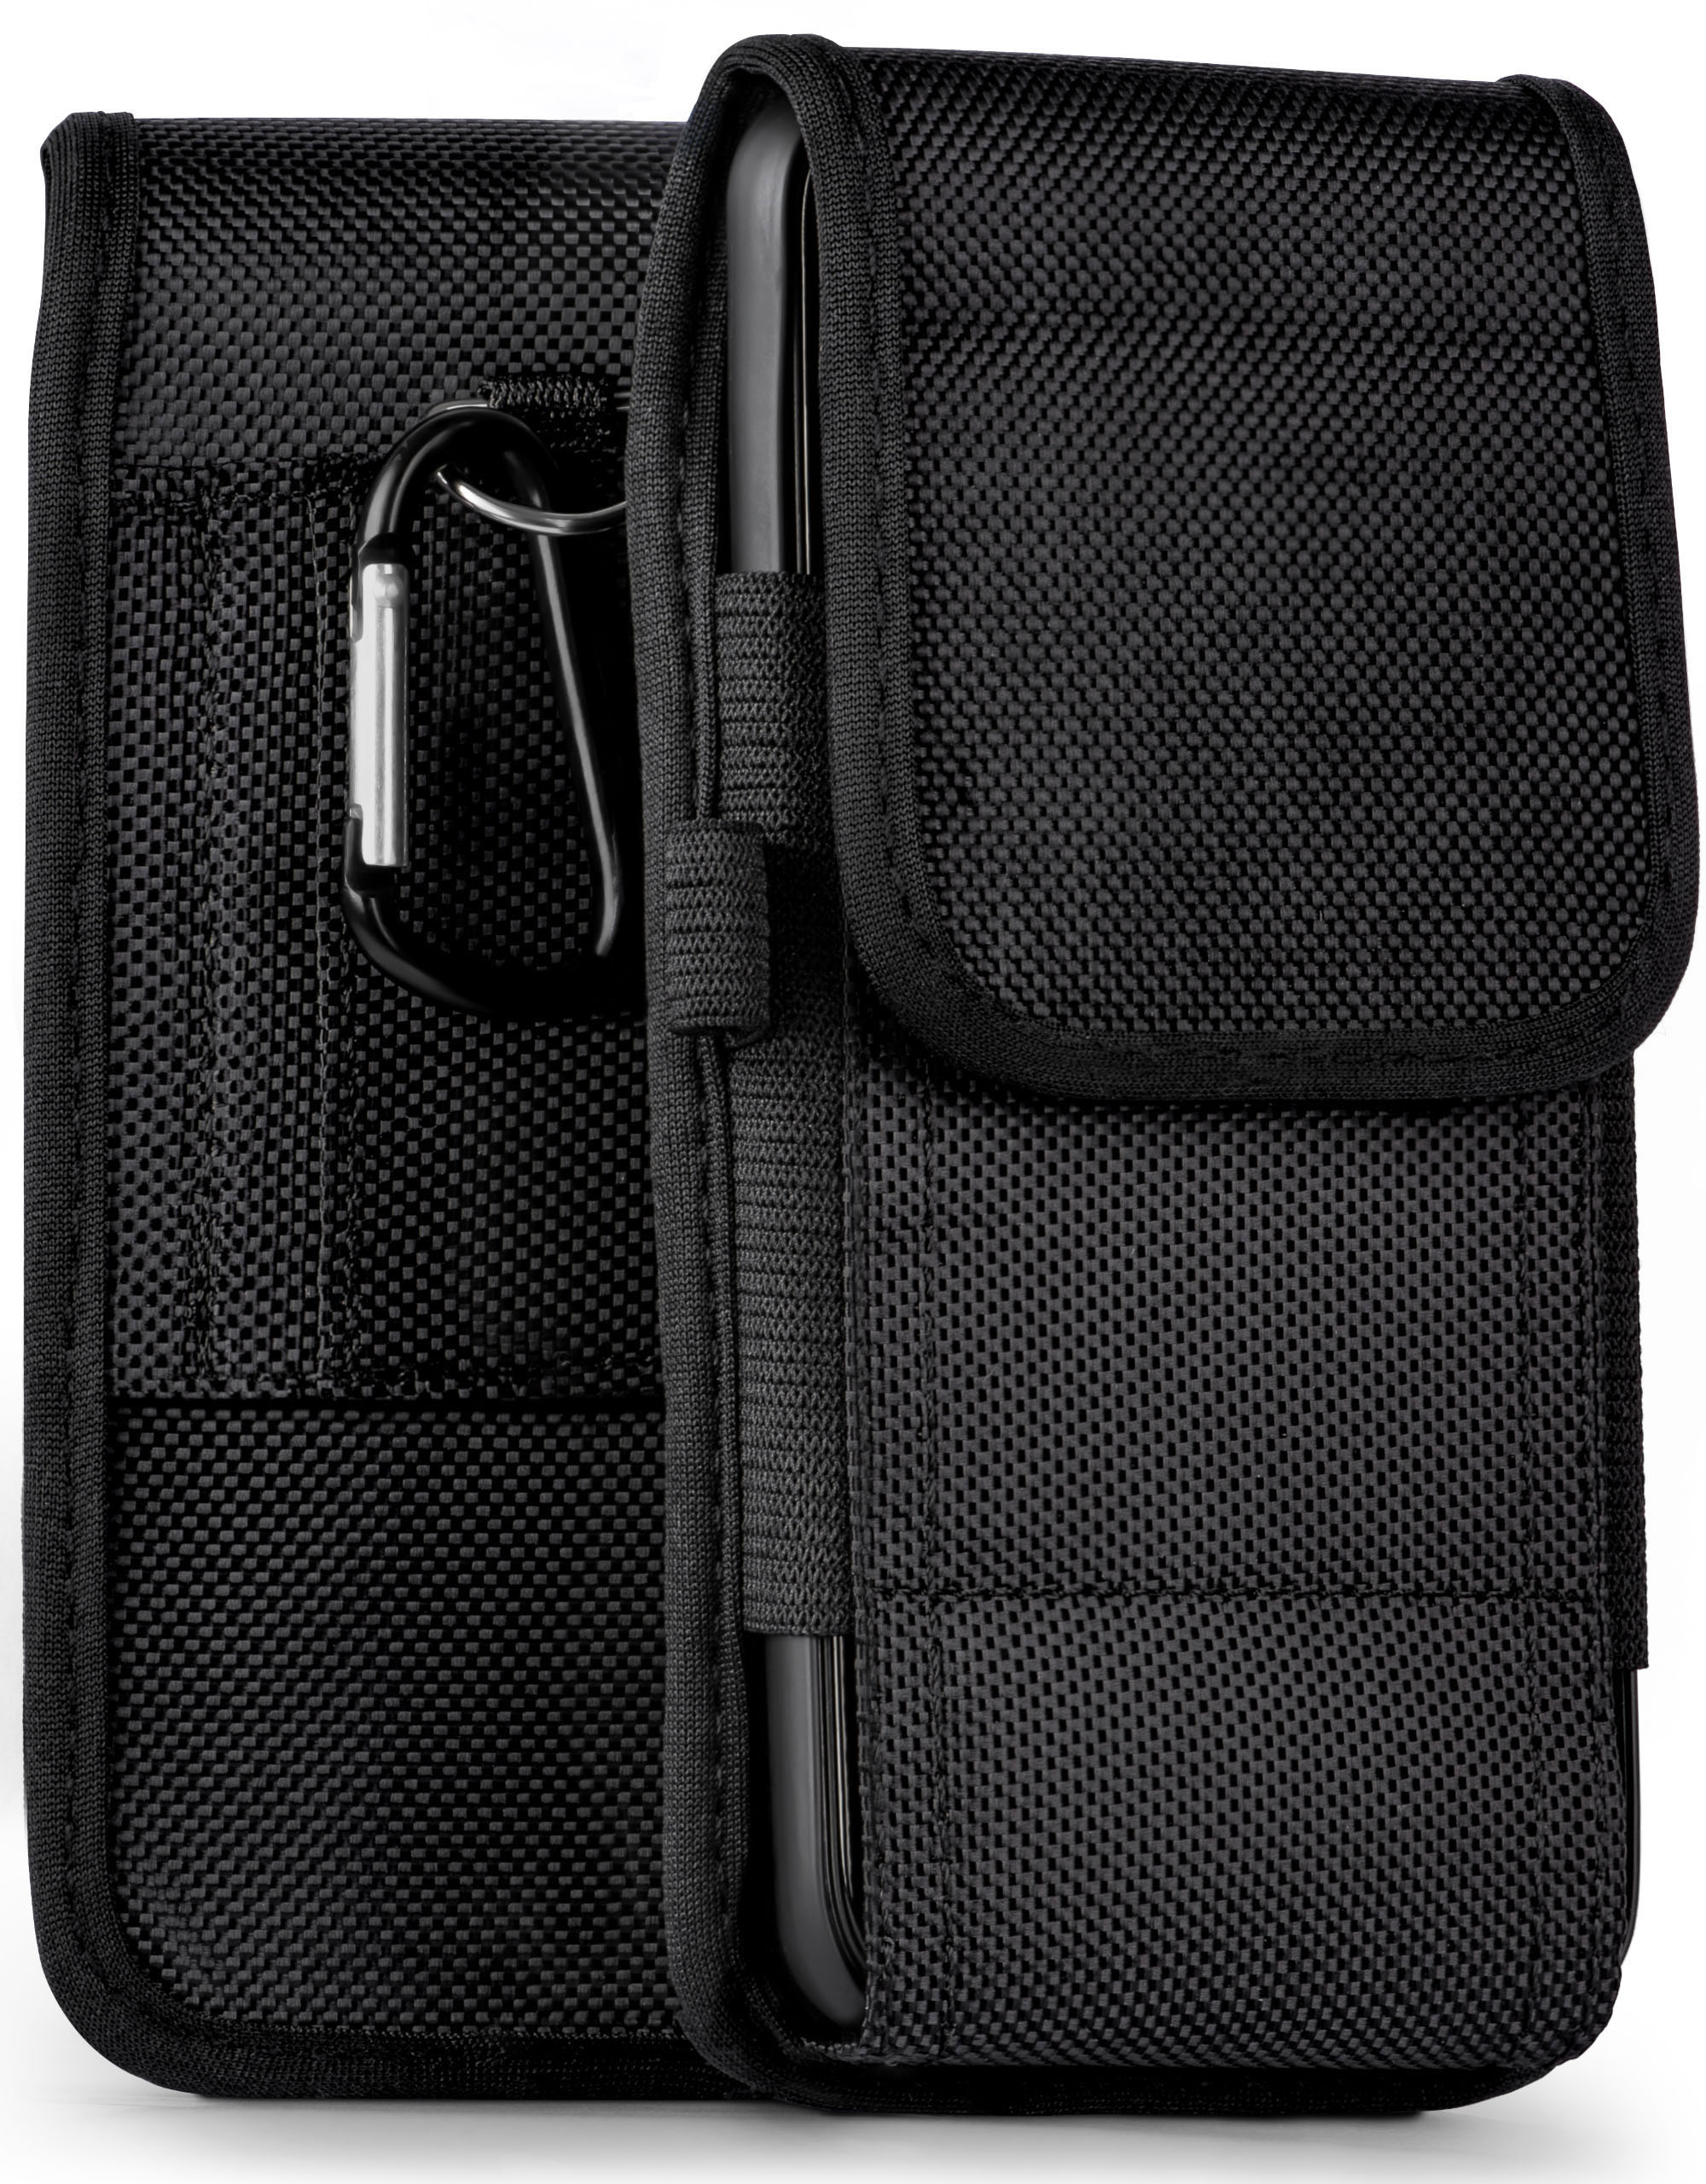 Z3 Agility Xperia Case, Sony, Holster, MOEX Compact, Trail